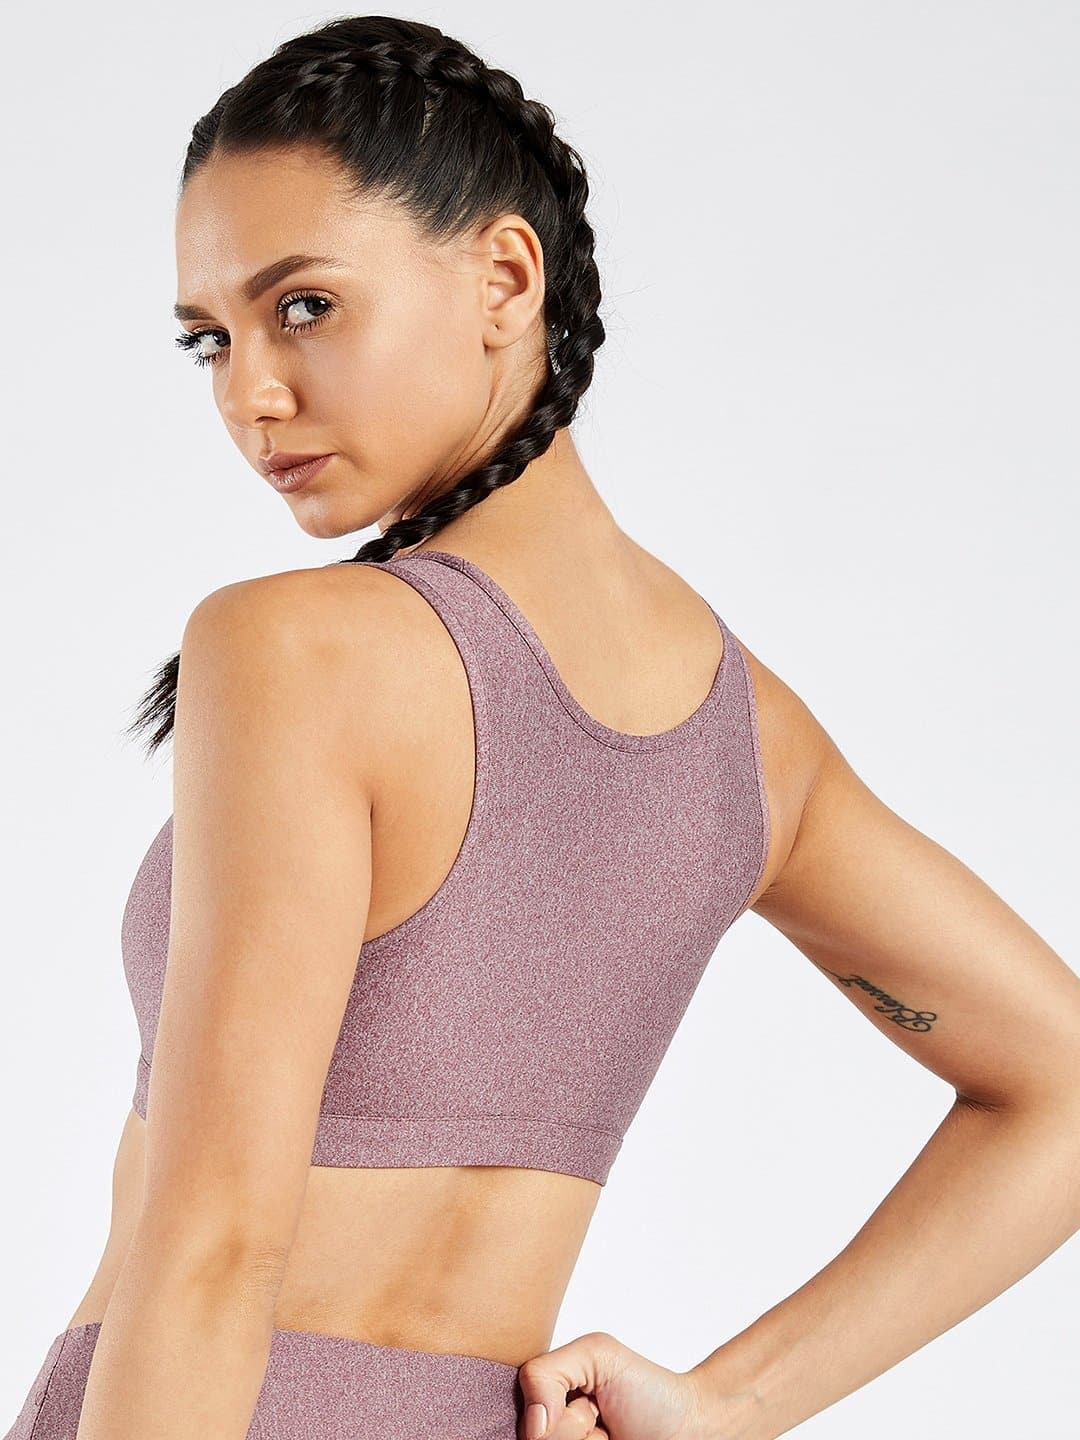 Maxtreme Pace Mellow Rose High Neck Sports Bra